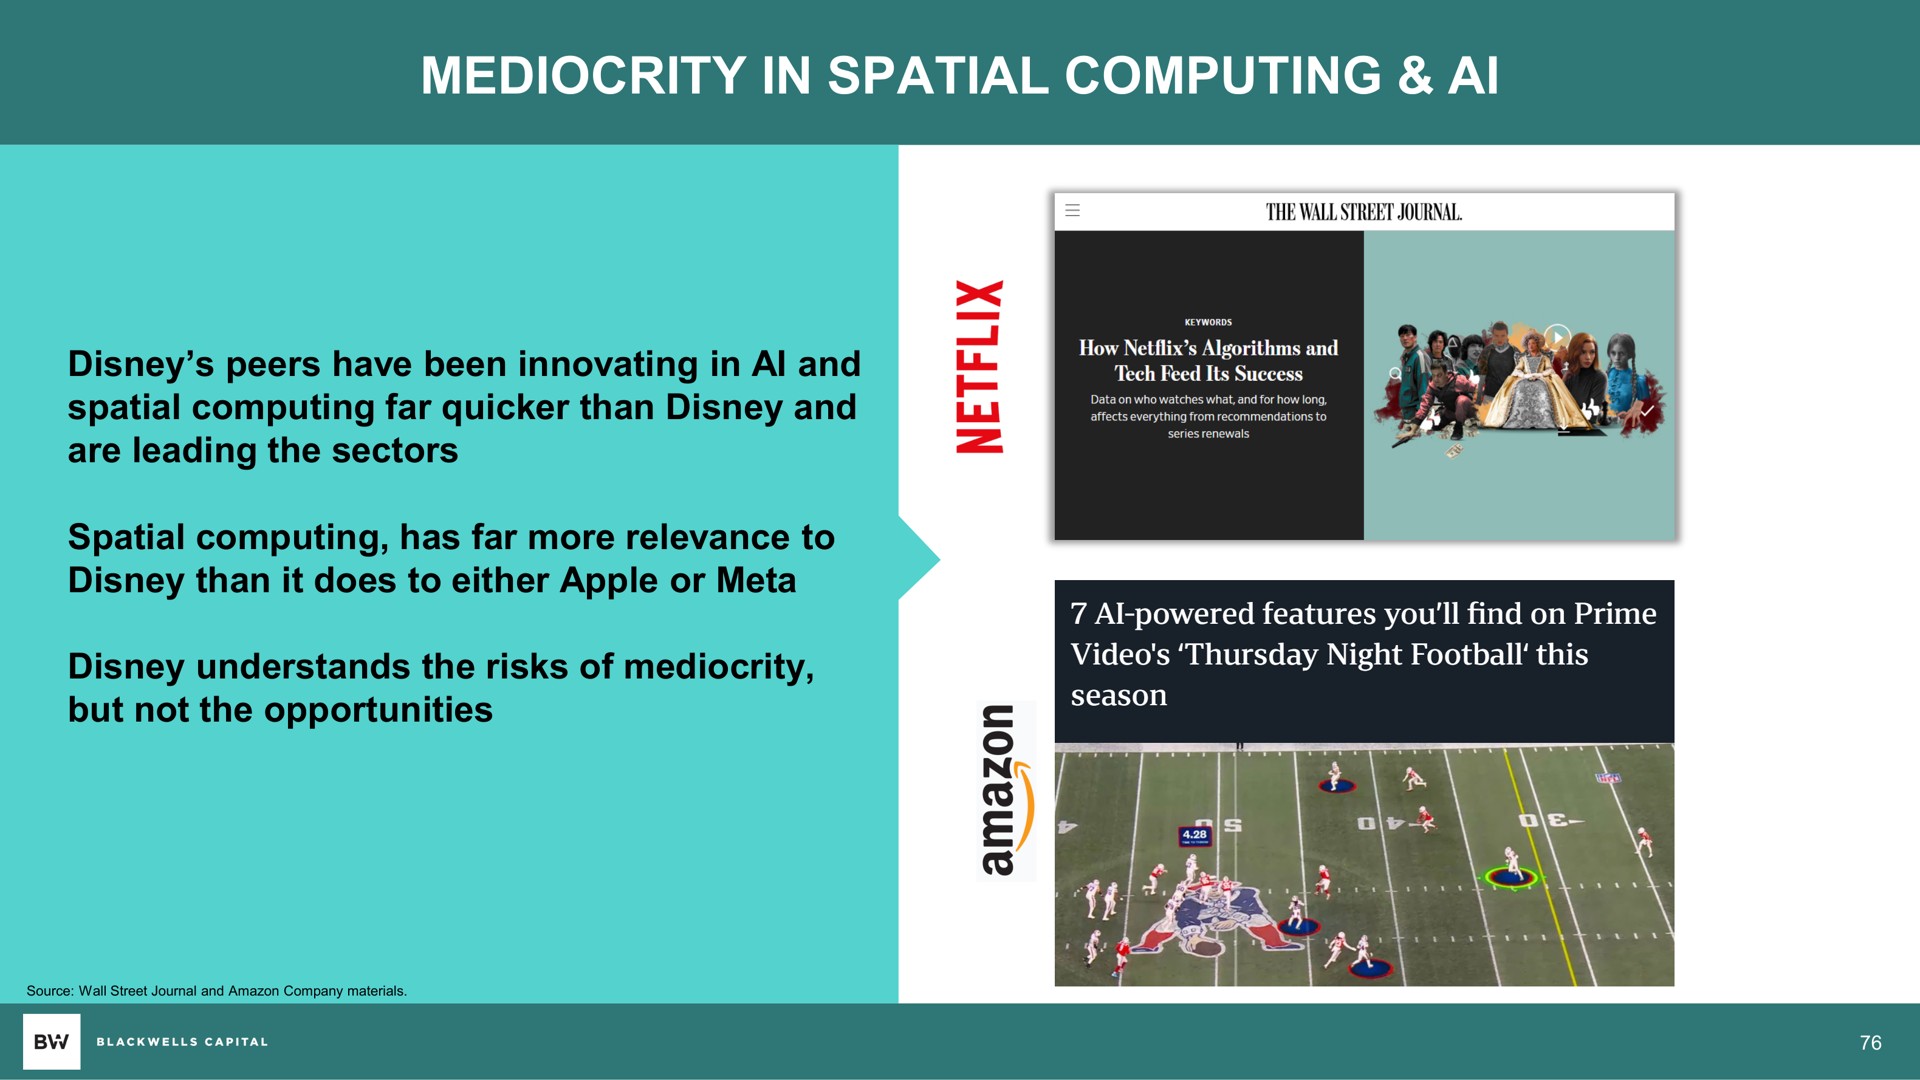 mediocrity in spatial computing are leading the sectors as | Blackwells Capital